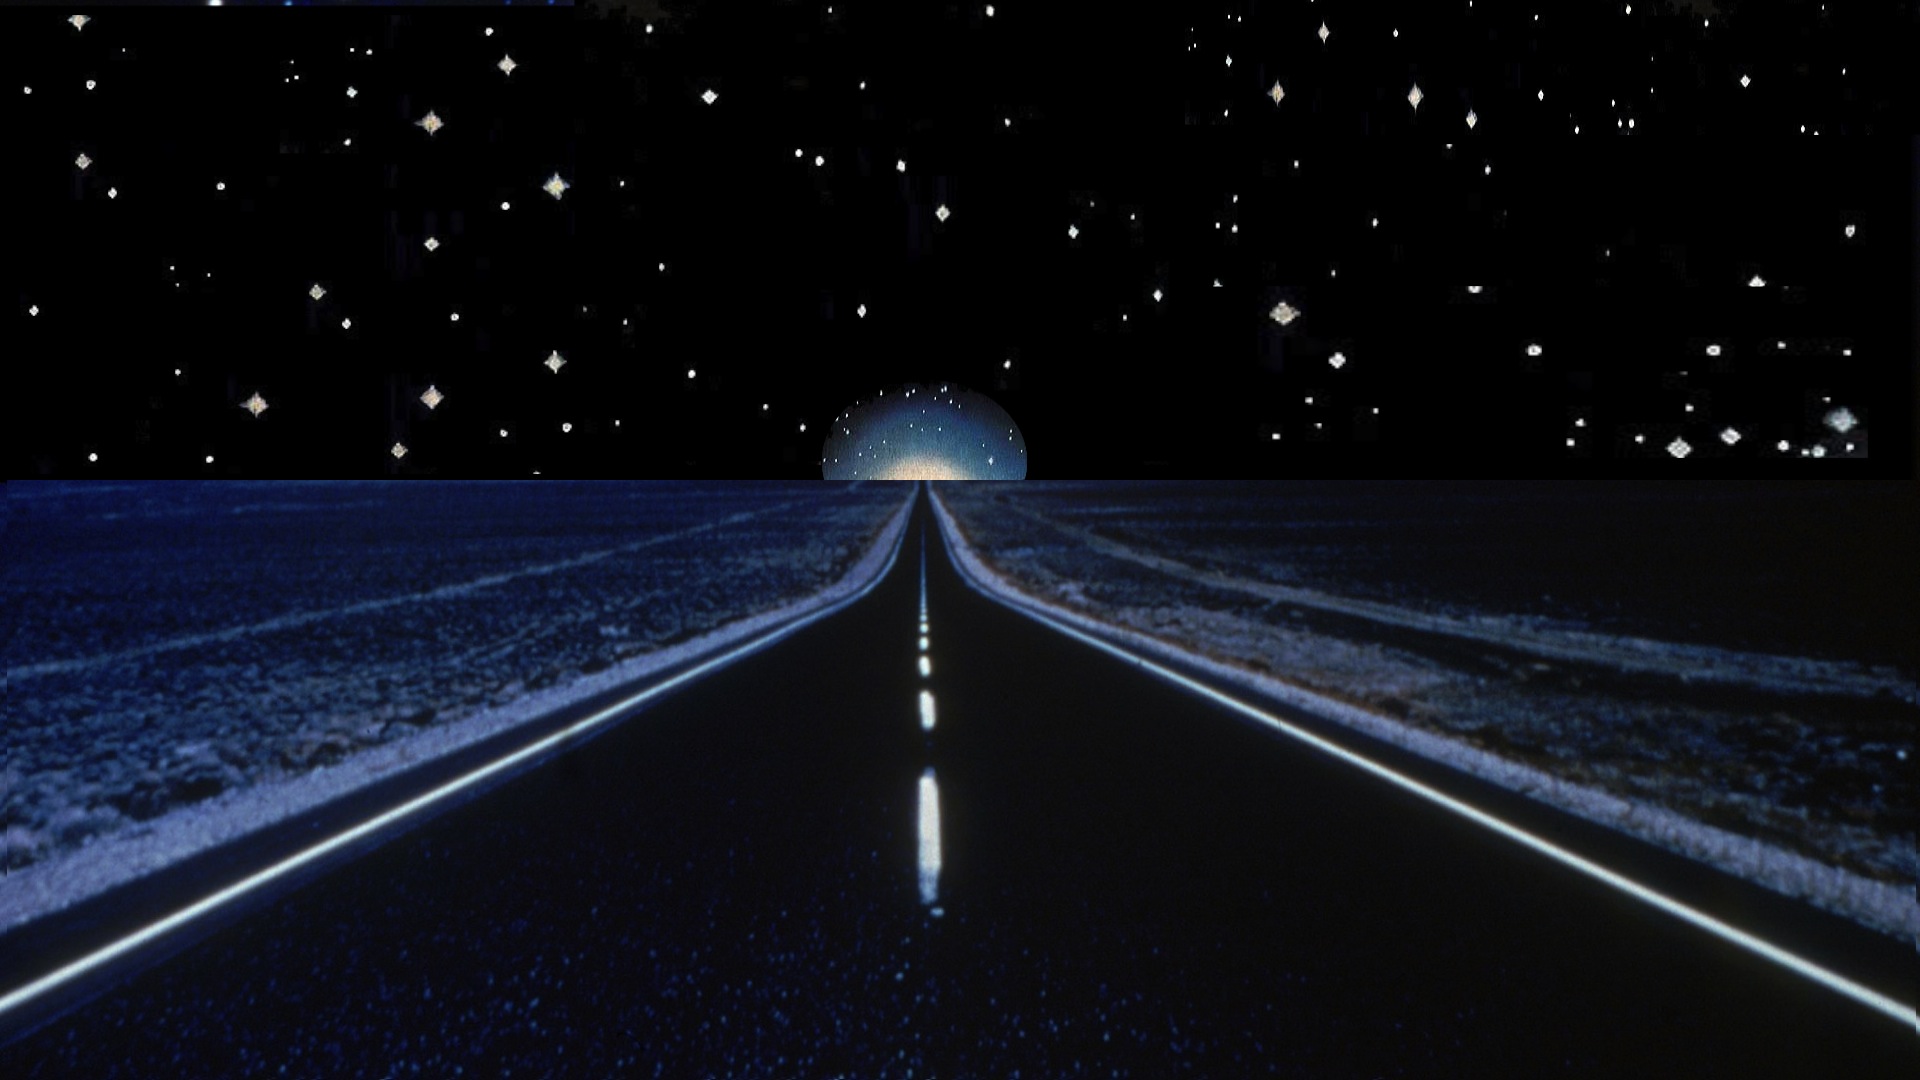 close, Encounters, Of, The, Third, Kind, Sci fi, Drama, Thriller, Road, Stars, Sky, Night, Poster Wallpaper